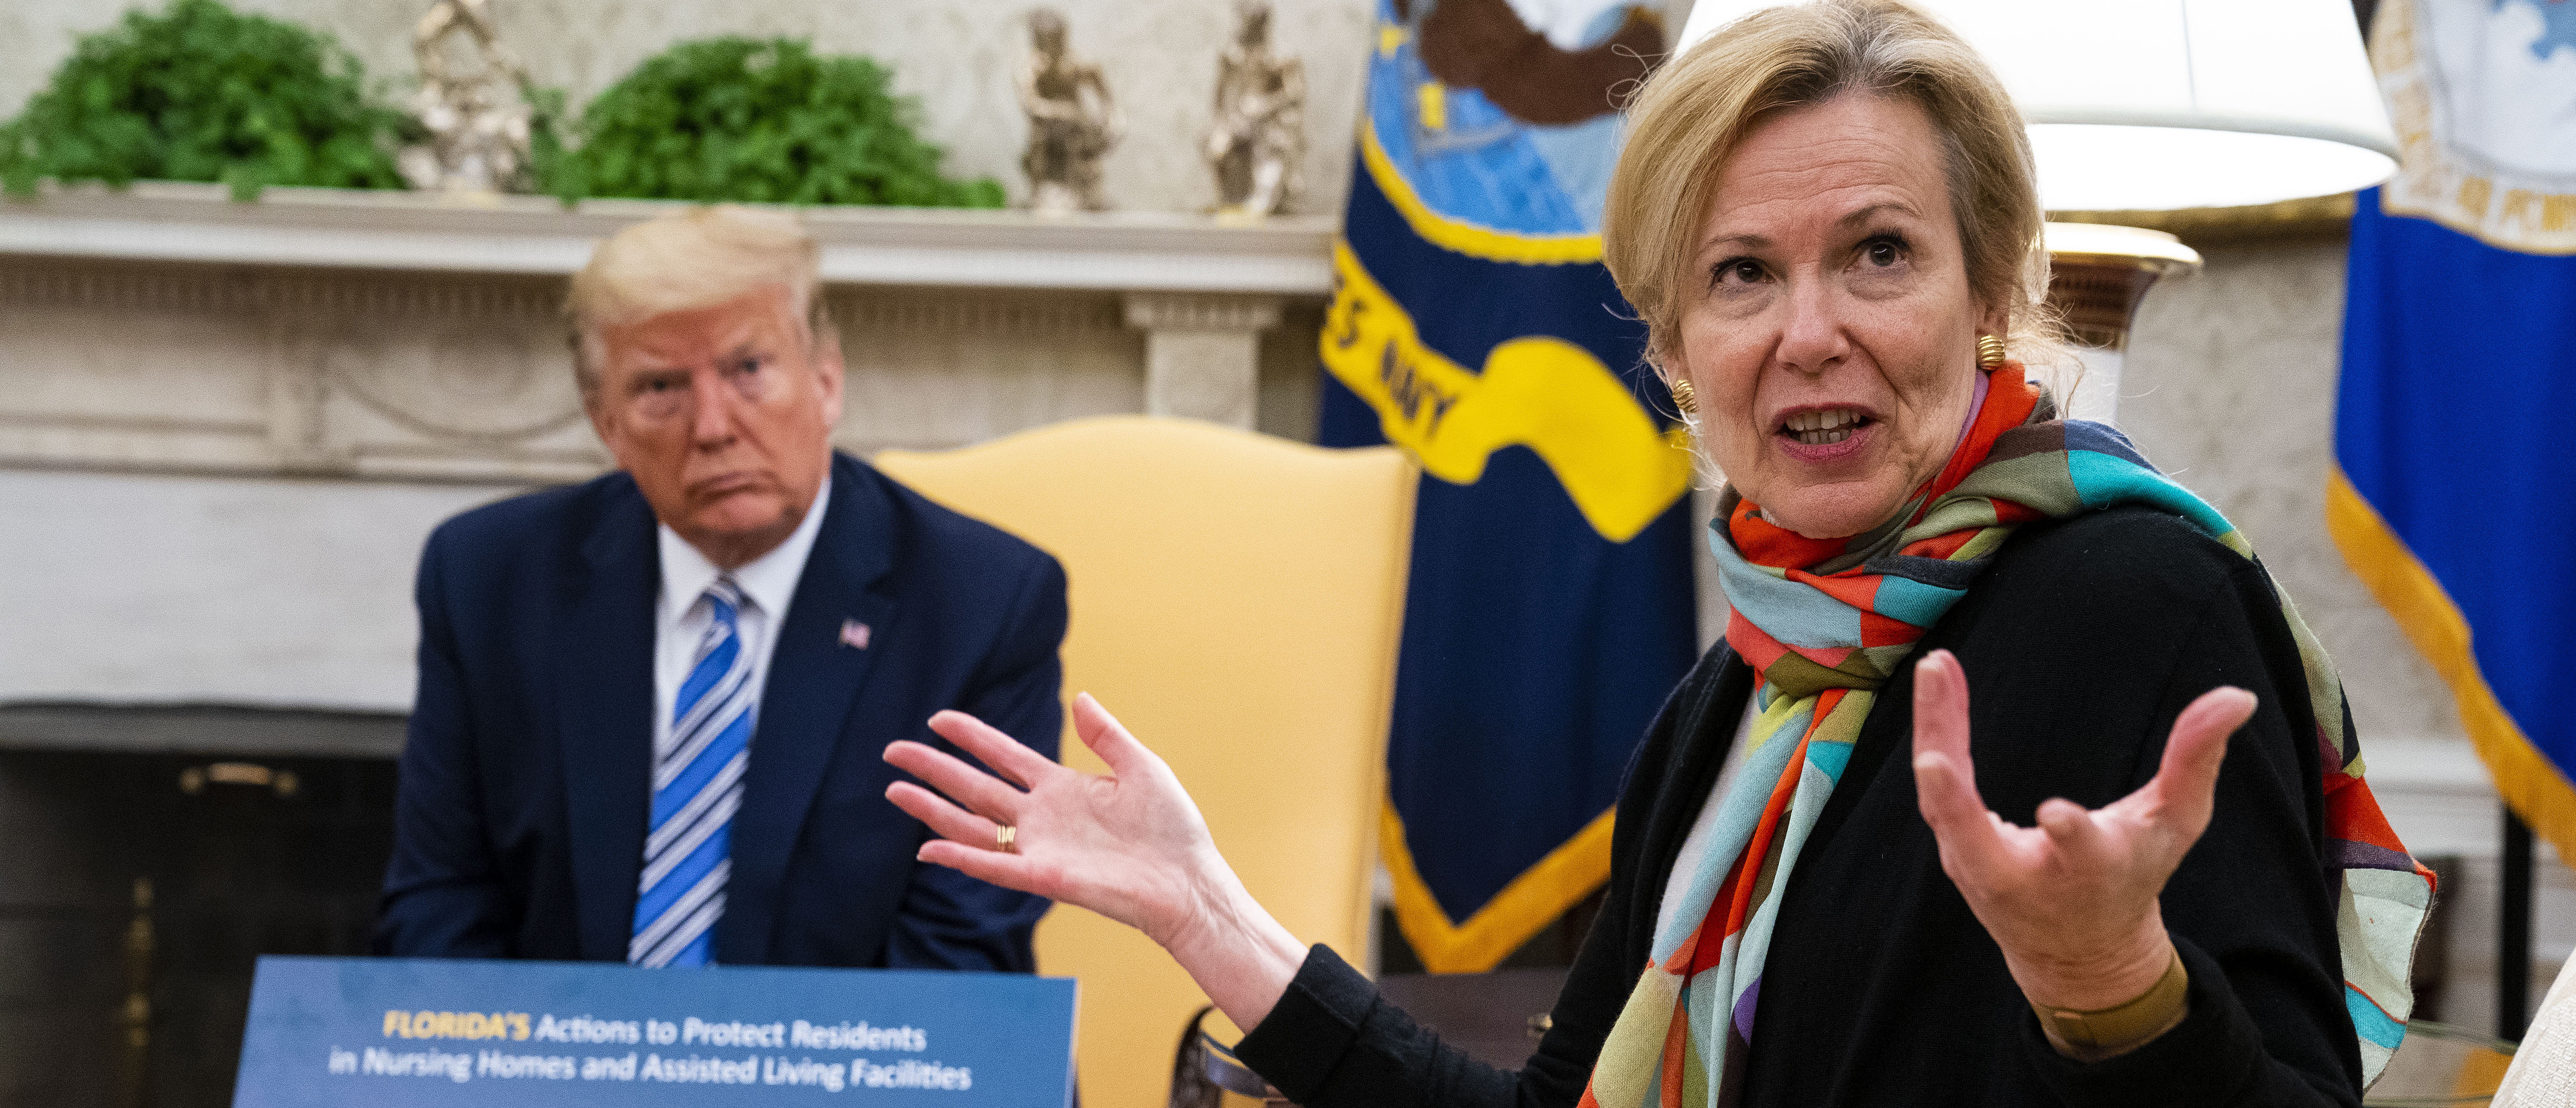 WASHINGTON, DC - APRIL 28: White House Coronavirus Task Force Coordinator Deborah Birx answers a question while meeting with Florida Gov. Ron DeSantis and U.S. President Donald Trump and in the Oval Office of the White House on April 28, 2020 in Washington, DC. Trump met with DeSantis to discuss ways that Florida is planning to gradually re-open the state in the wake of the COVID-19 pandemic. (Photo by Doug Mills/The New York Times/Pool/Getty Images)